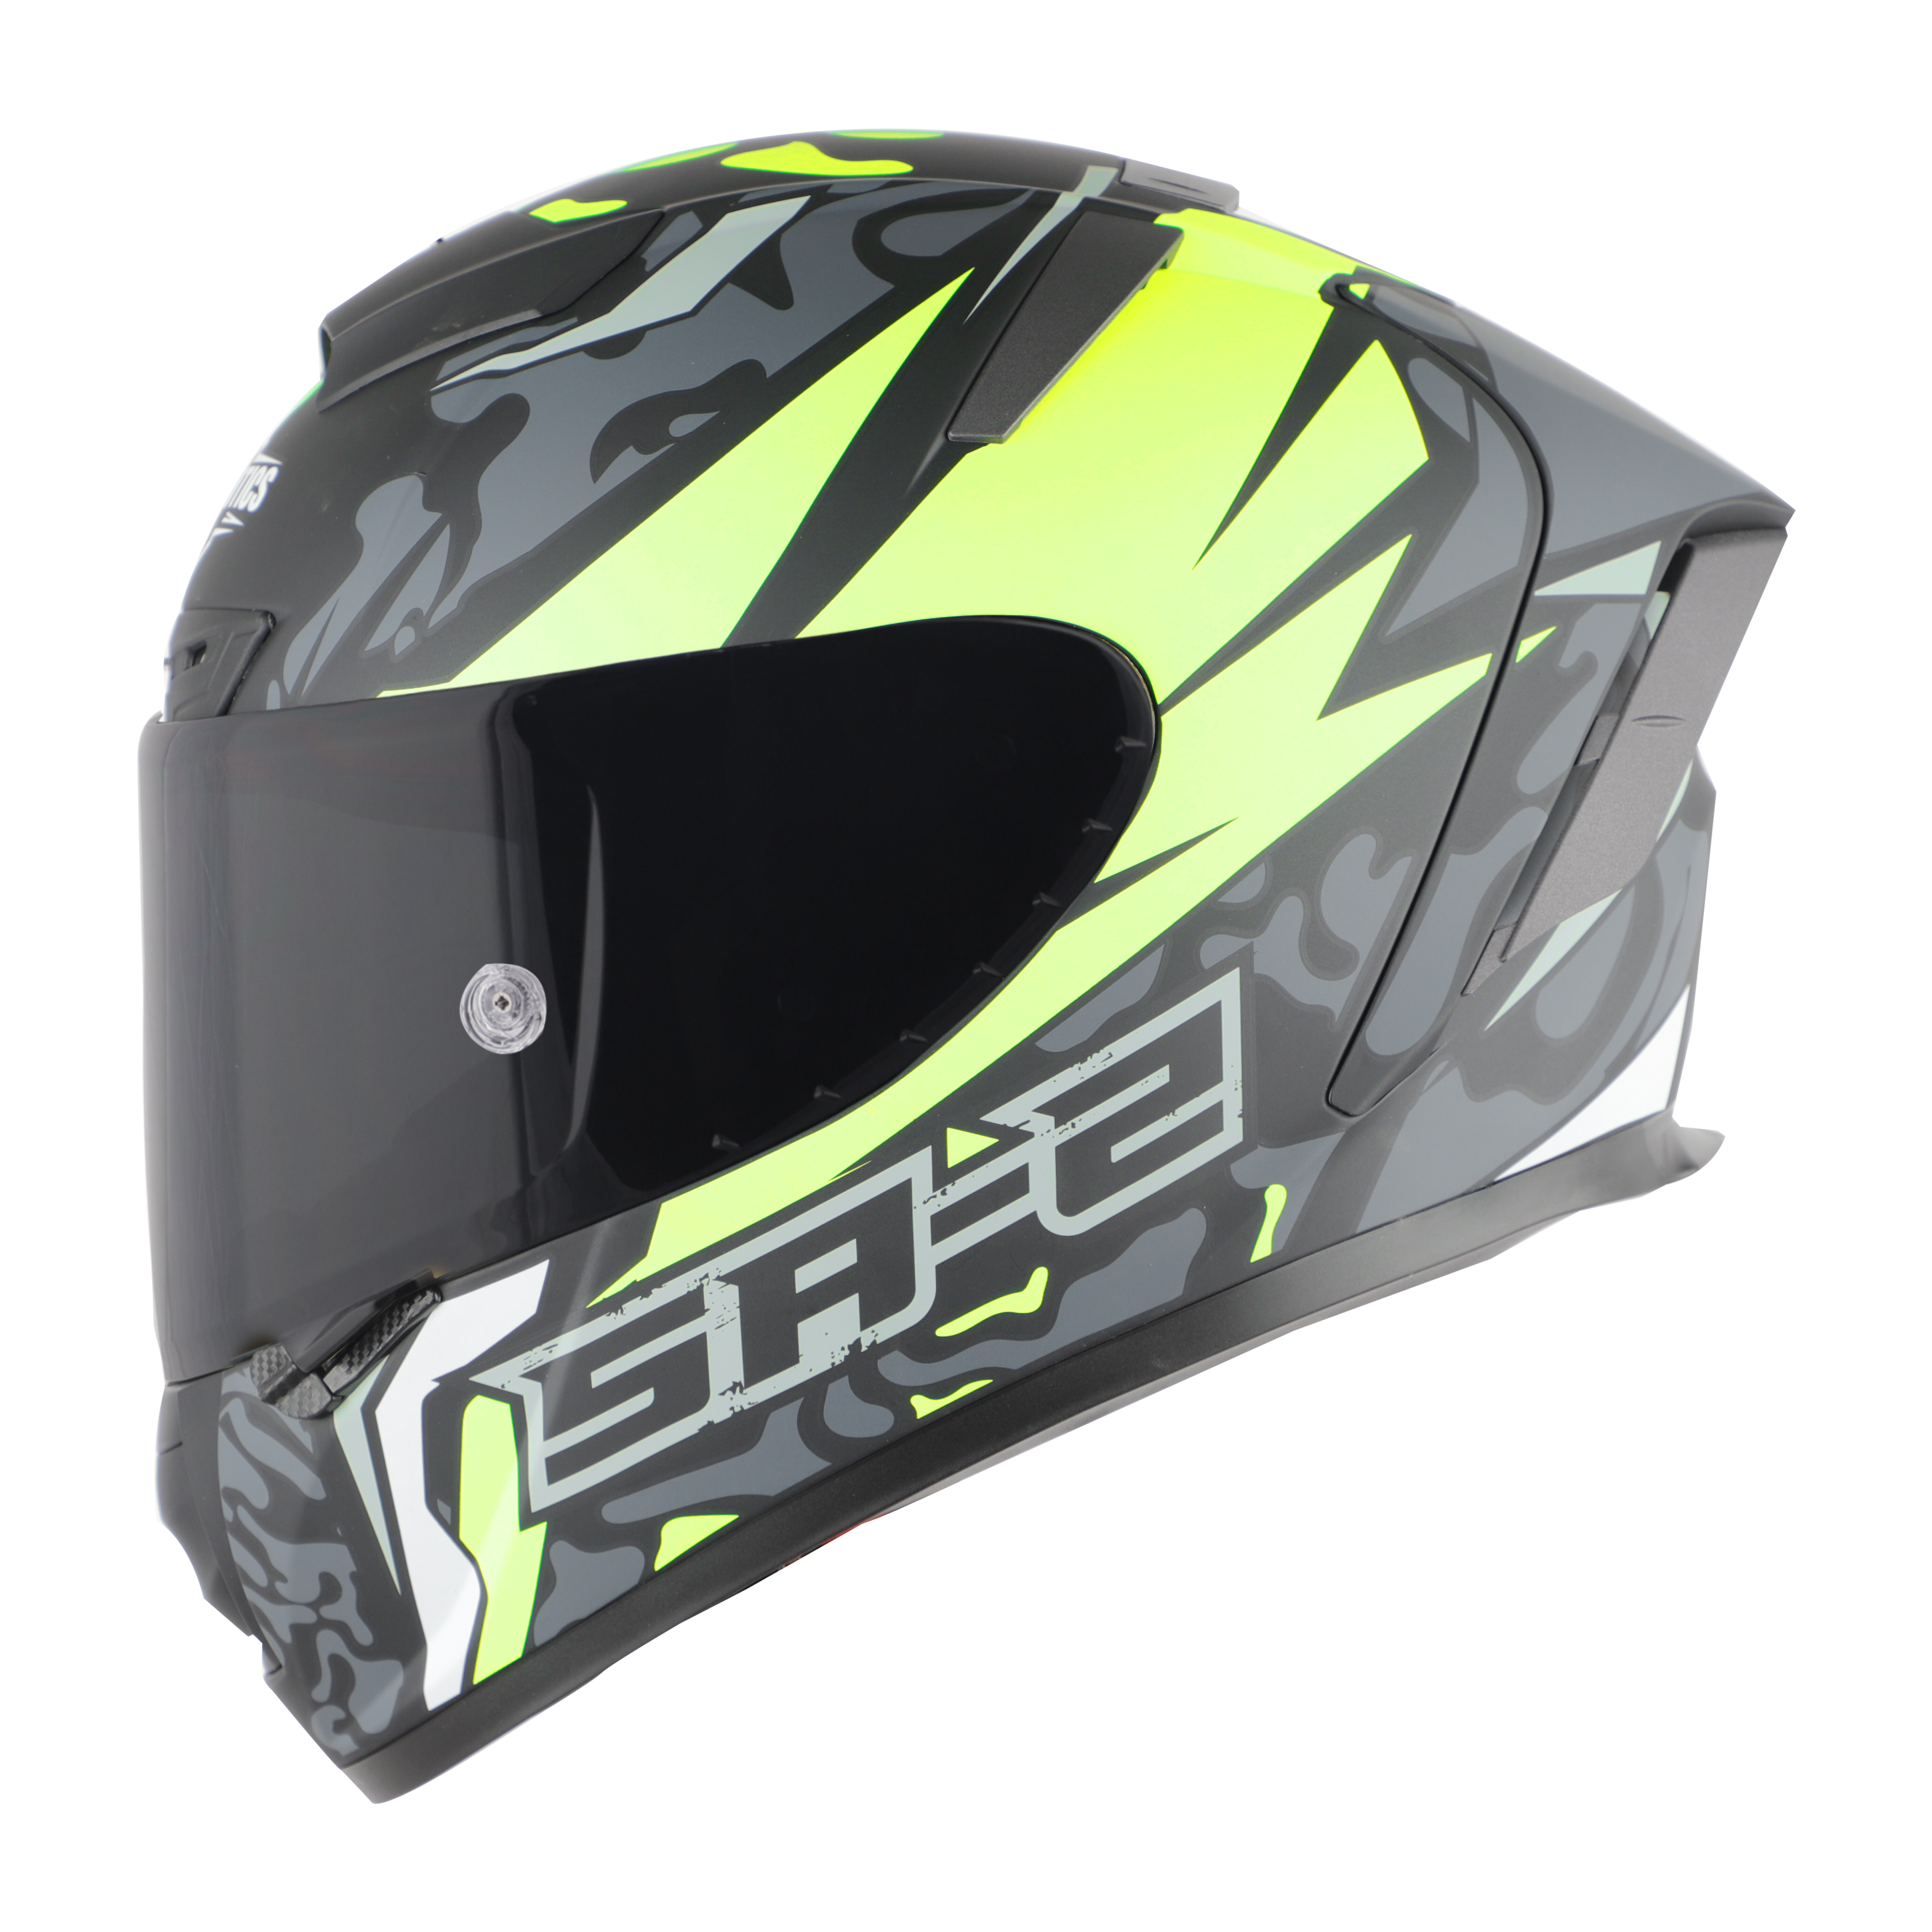 SA-2 TERMINATOR 3.0 MAT BLACK WITH NEON FITTED WITH CLEAR VISOR EXTRA SMOKE VISOR FREE (WITH ANTI-FOR SHIELD HOLDER)